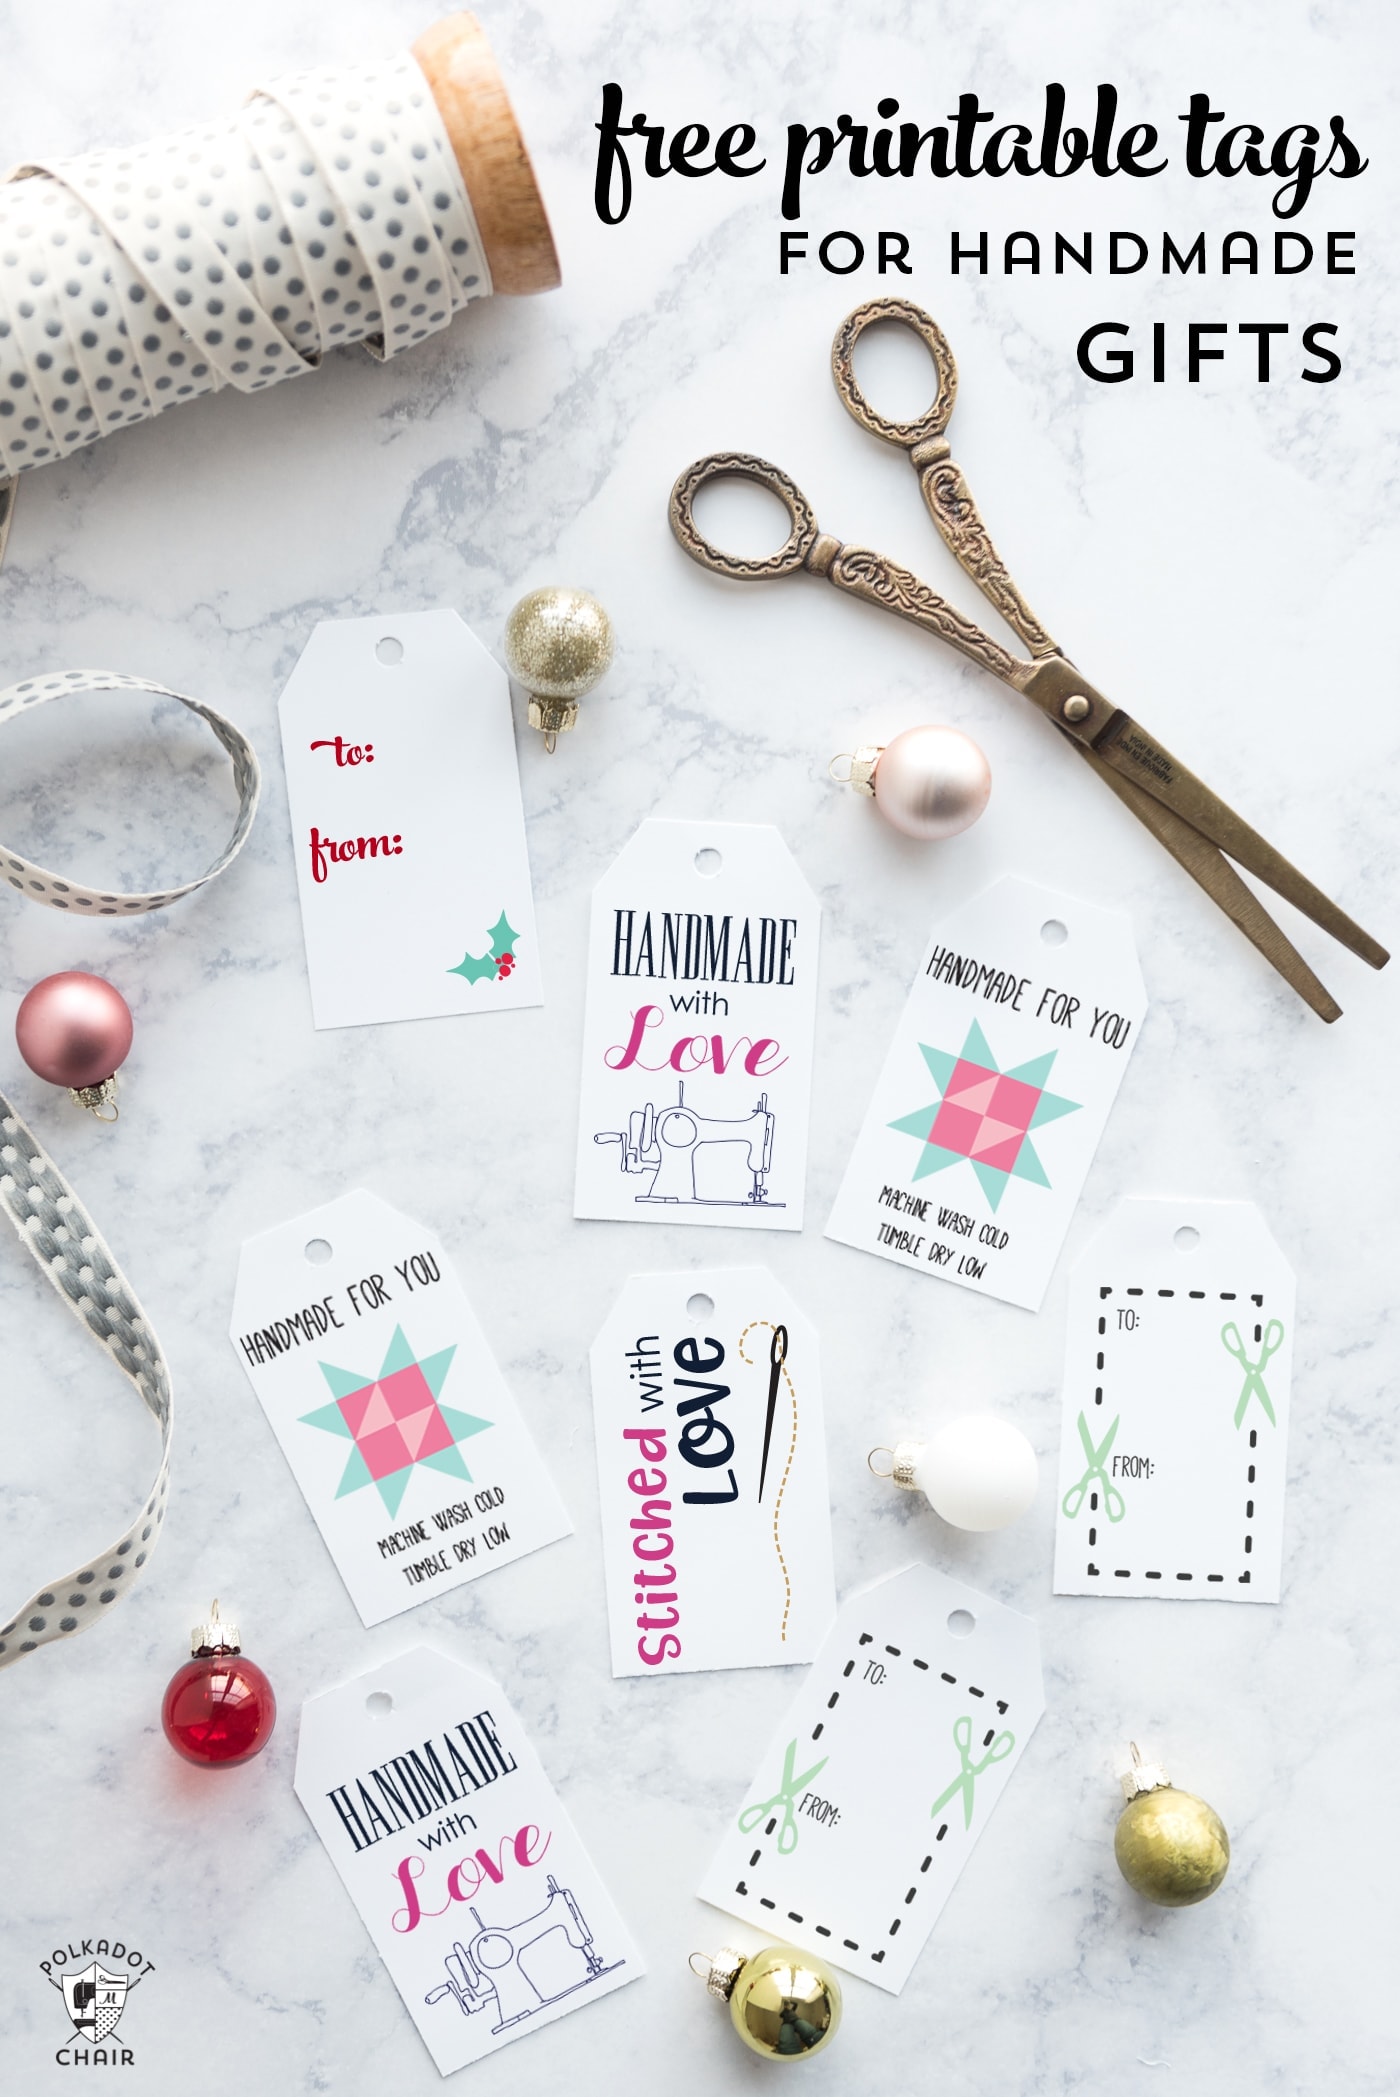 10  Free Printable Gift Tags Perfect for Handmade Gifts